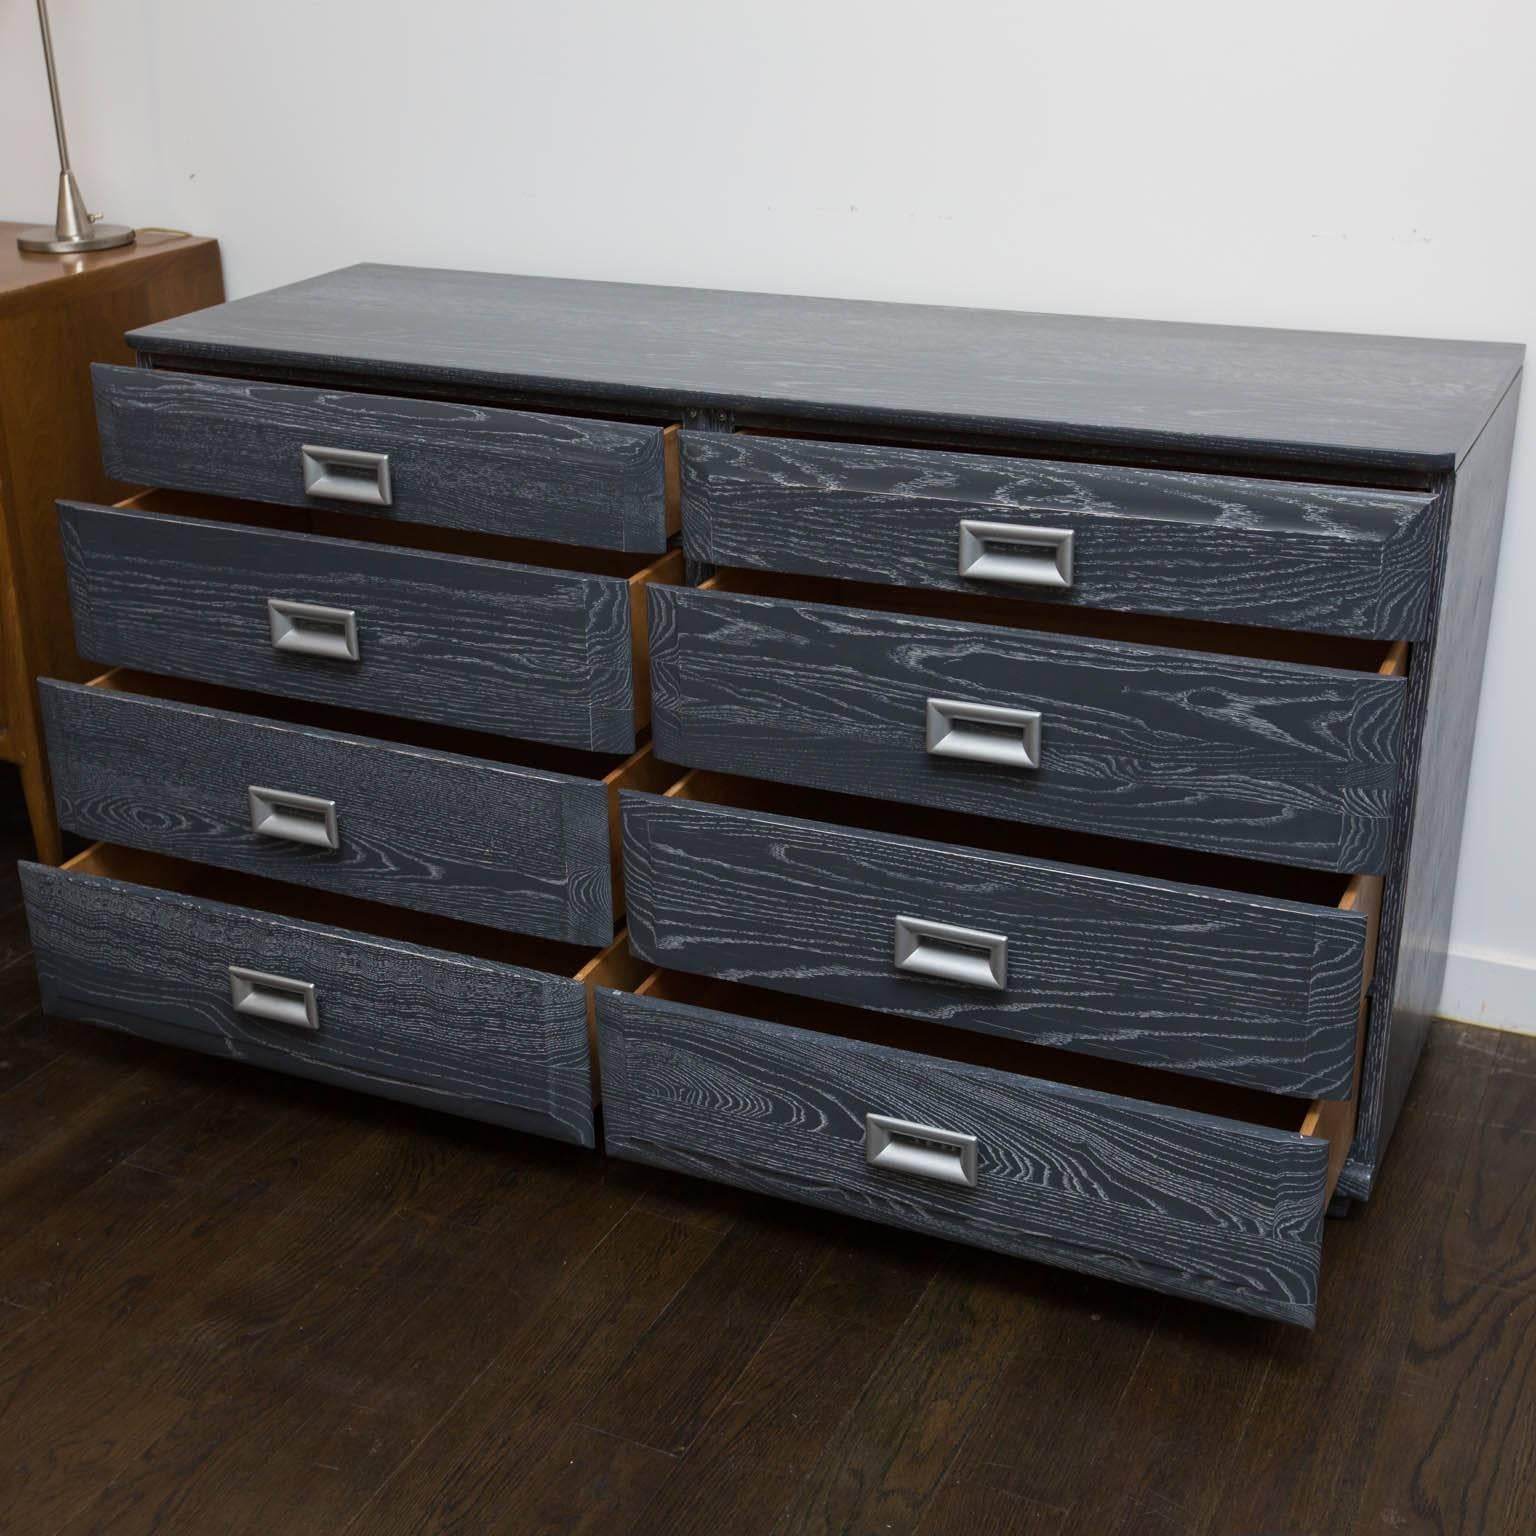 Newly refinished in a dark grey ceruse over a solid oak frame with lacquered silver drawer pulls.